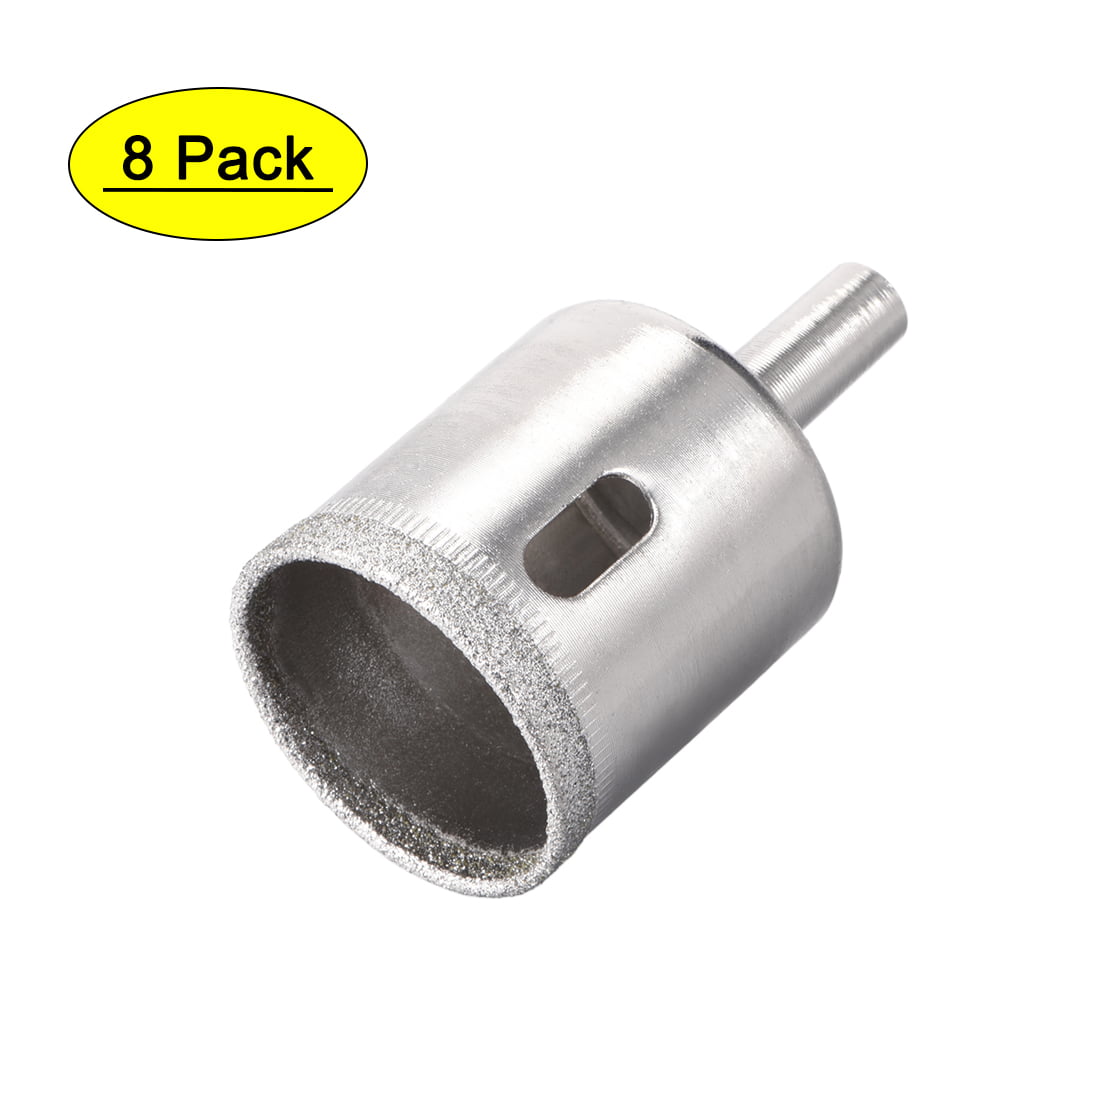 uxcell 16mm Diamond Drill Bits Hole Saws for Glass Ceramic Porcelain Tiles Pack of 10